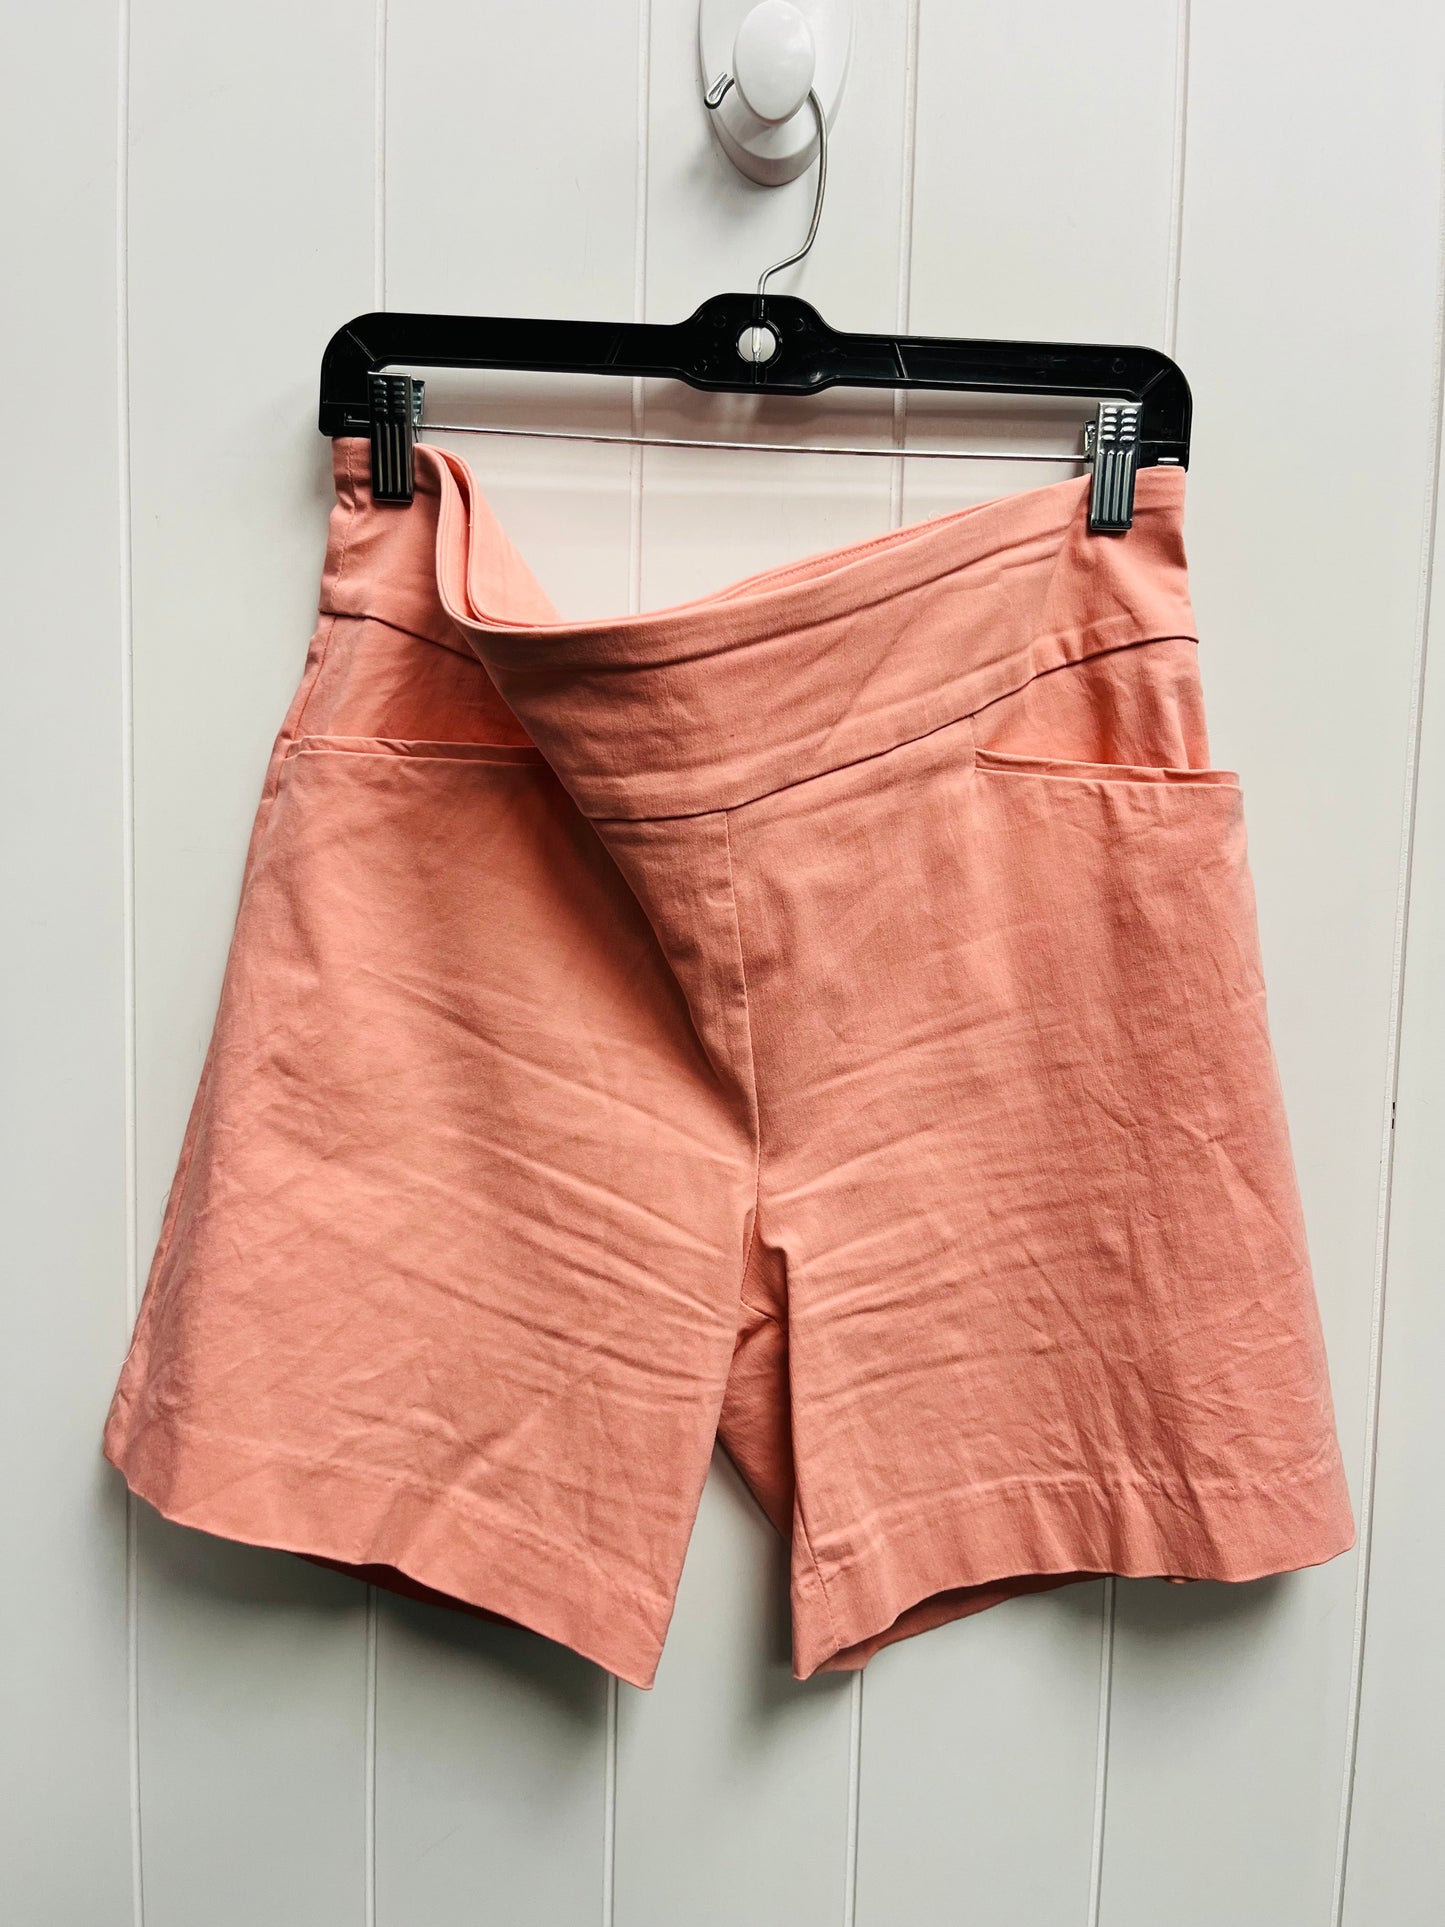 Shorts By Briggs  Size: 16